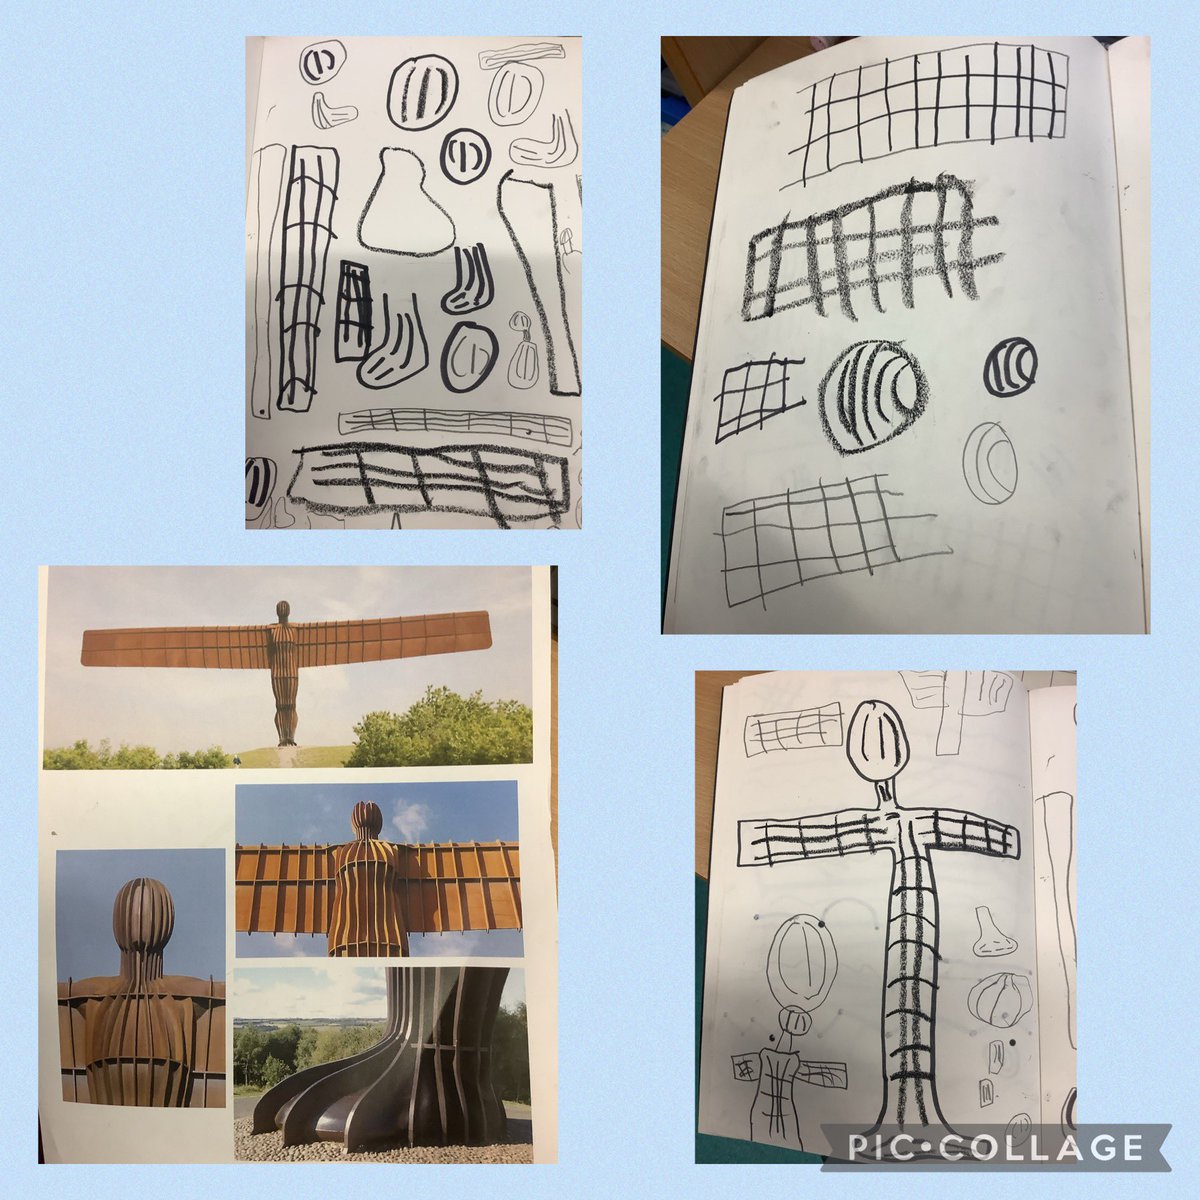 Year 2 have been looking at the Angel of the North and recording observations in their sketch books @FallaParkSchool @Miss_Carr_Falla @MrsMcMillanFP